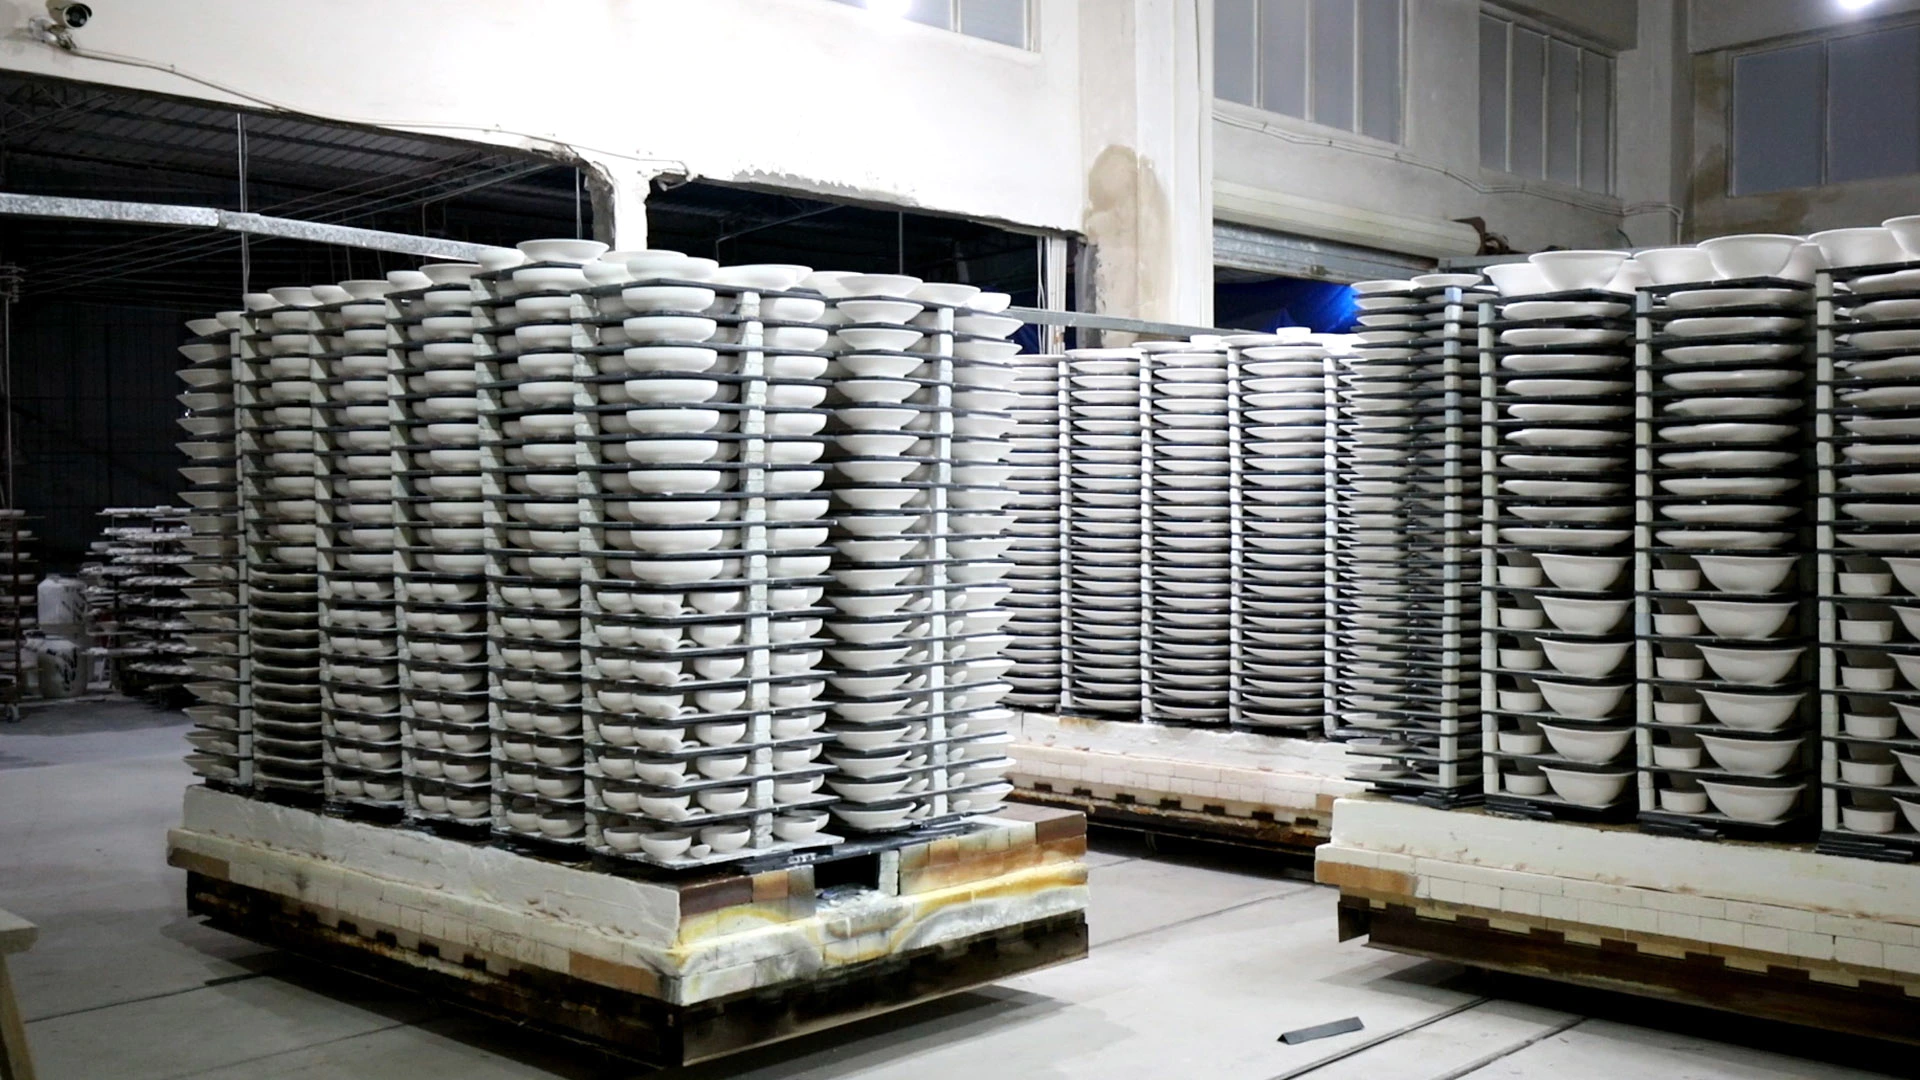 Mass production of porcelain tableware